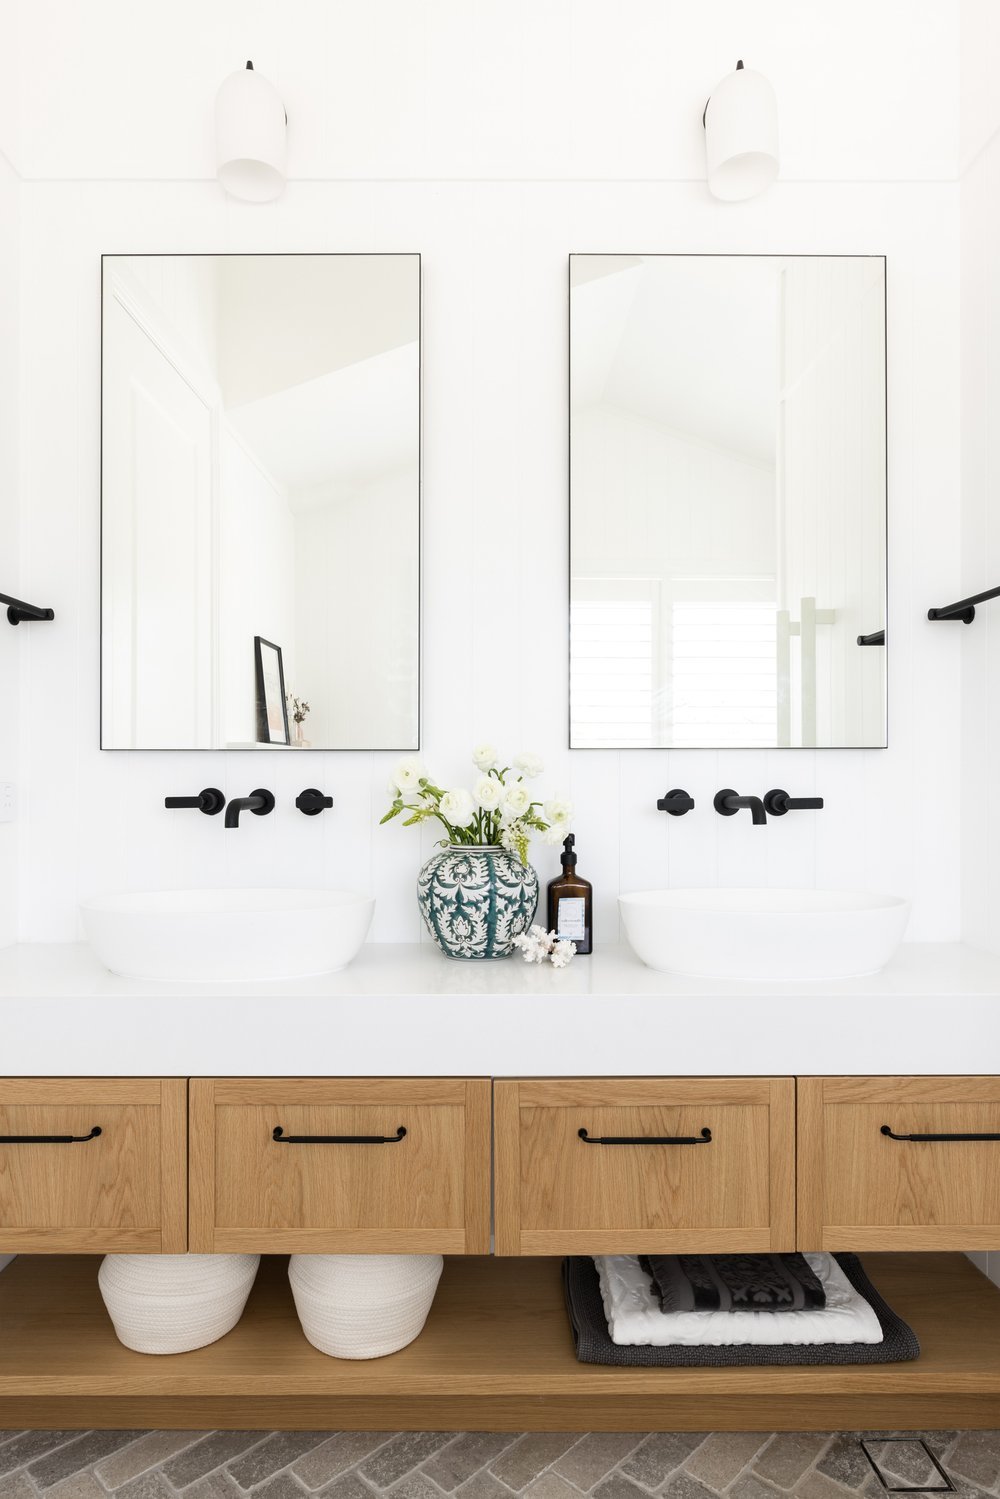 Heliconia Interior Designers Northern Beaches Manly The Gable House Farmhouse Hamptons Renovation Guest Bathroom Basin and Mirror.jpg